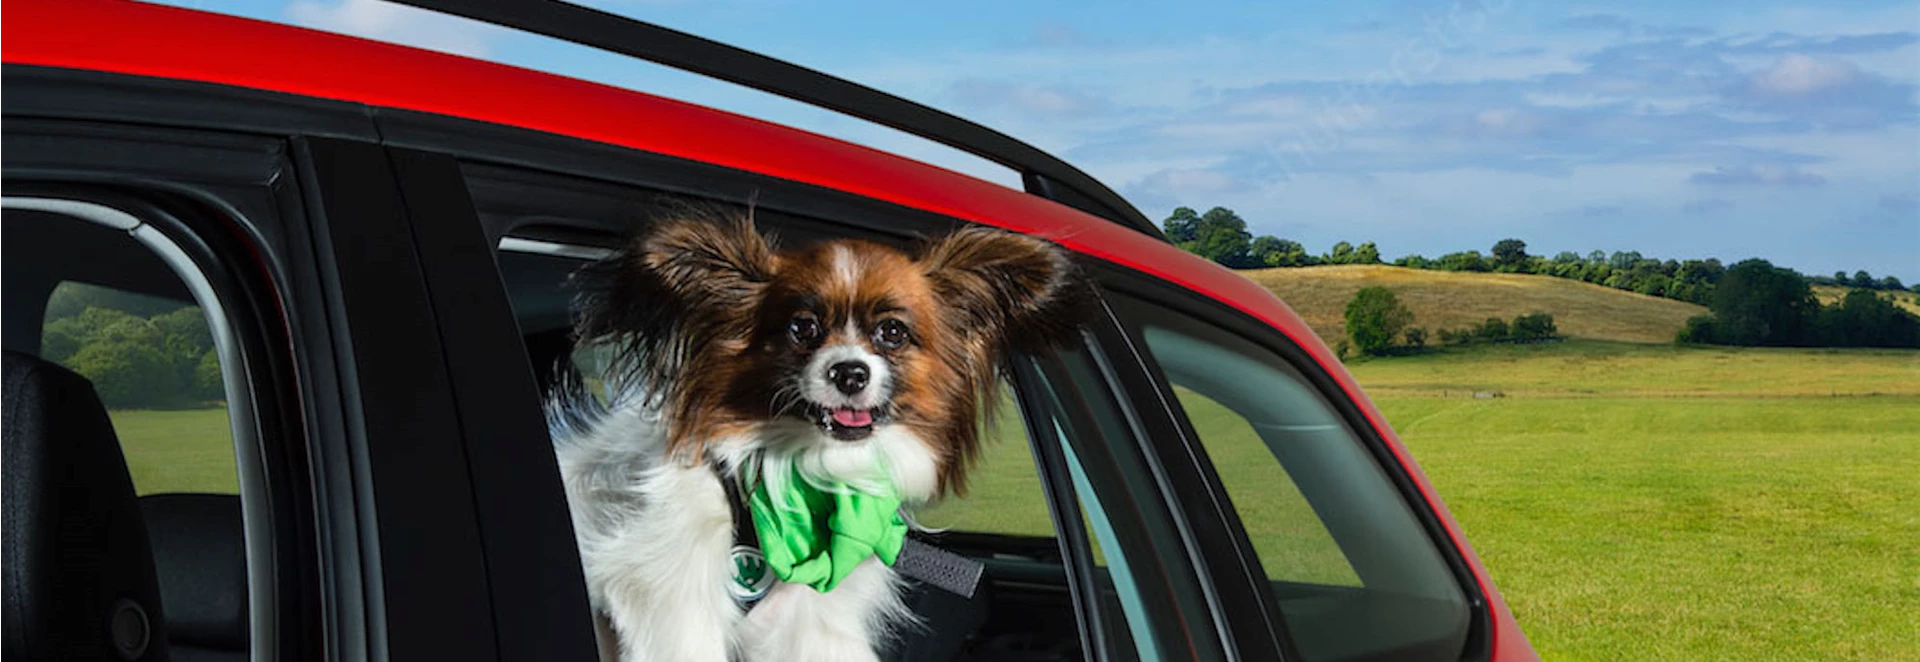 Best cars for dogs 2018